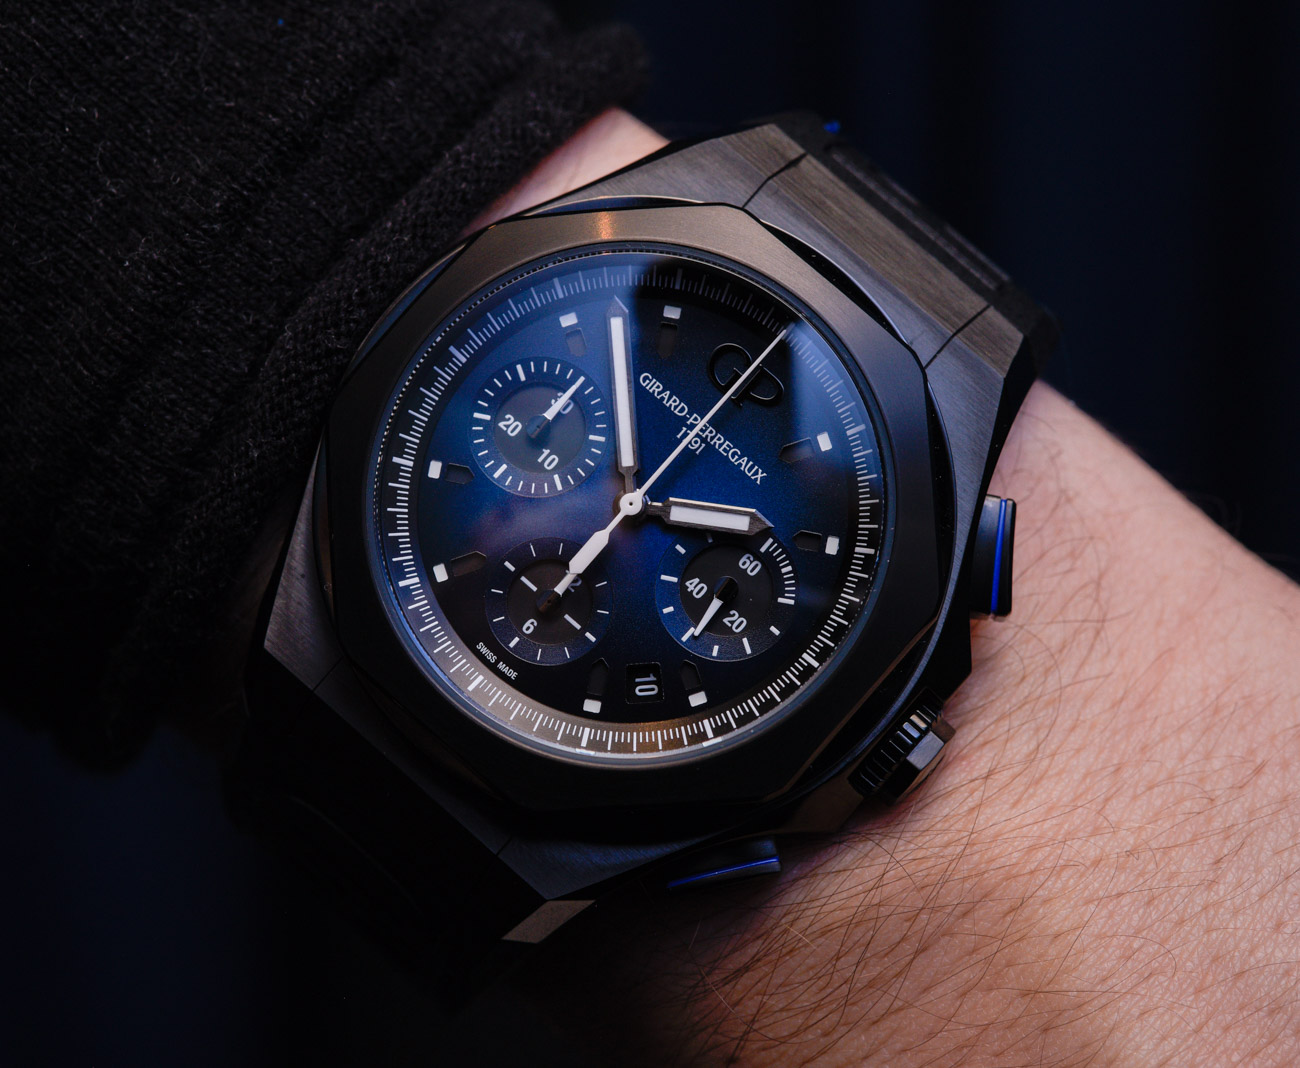 Girard-Perregaux Laureato Absolute Chronograph Watch Hands-On ...